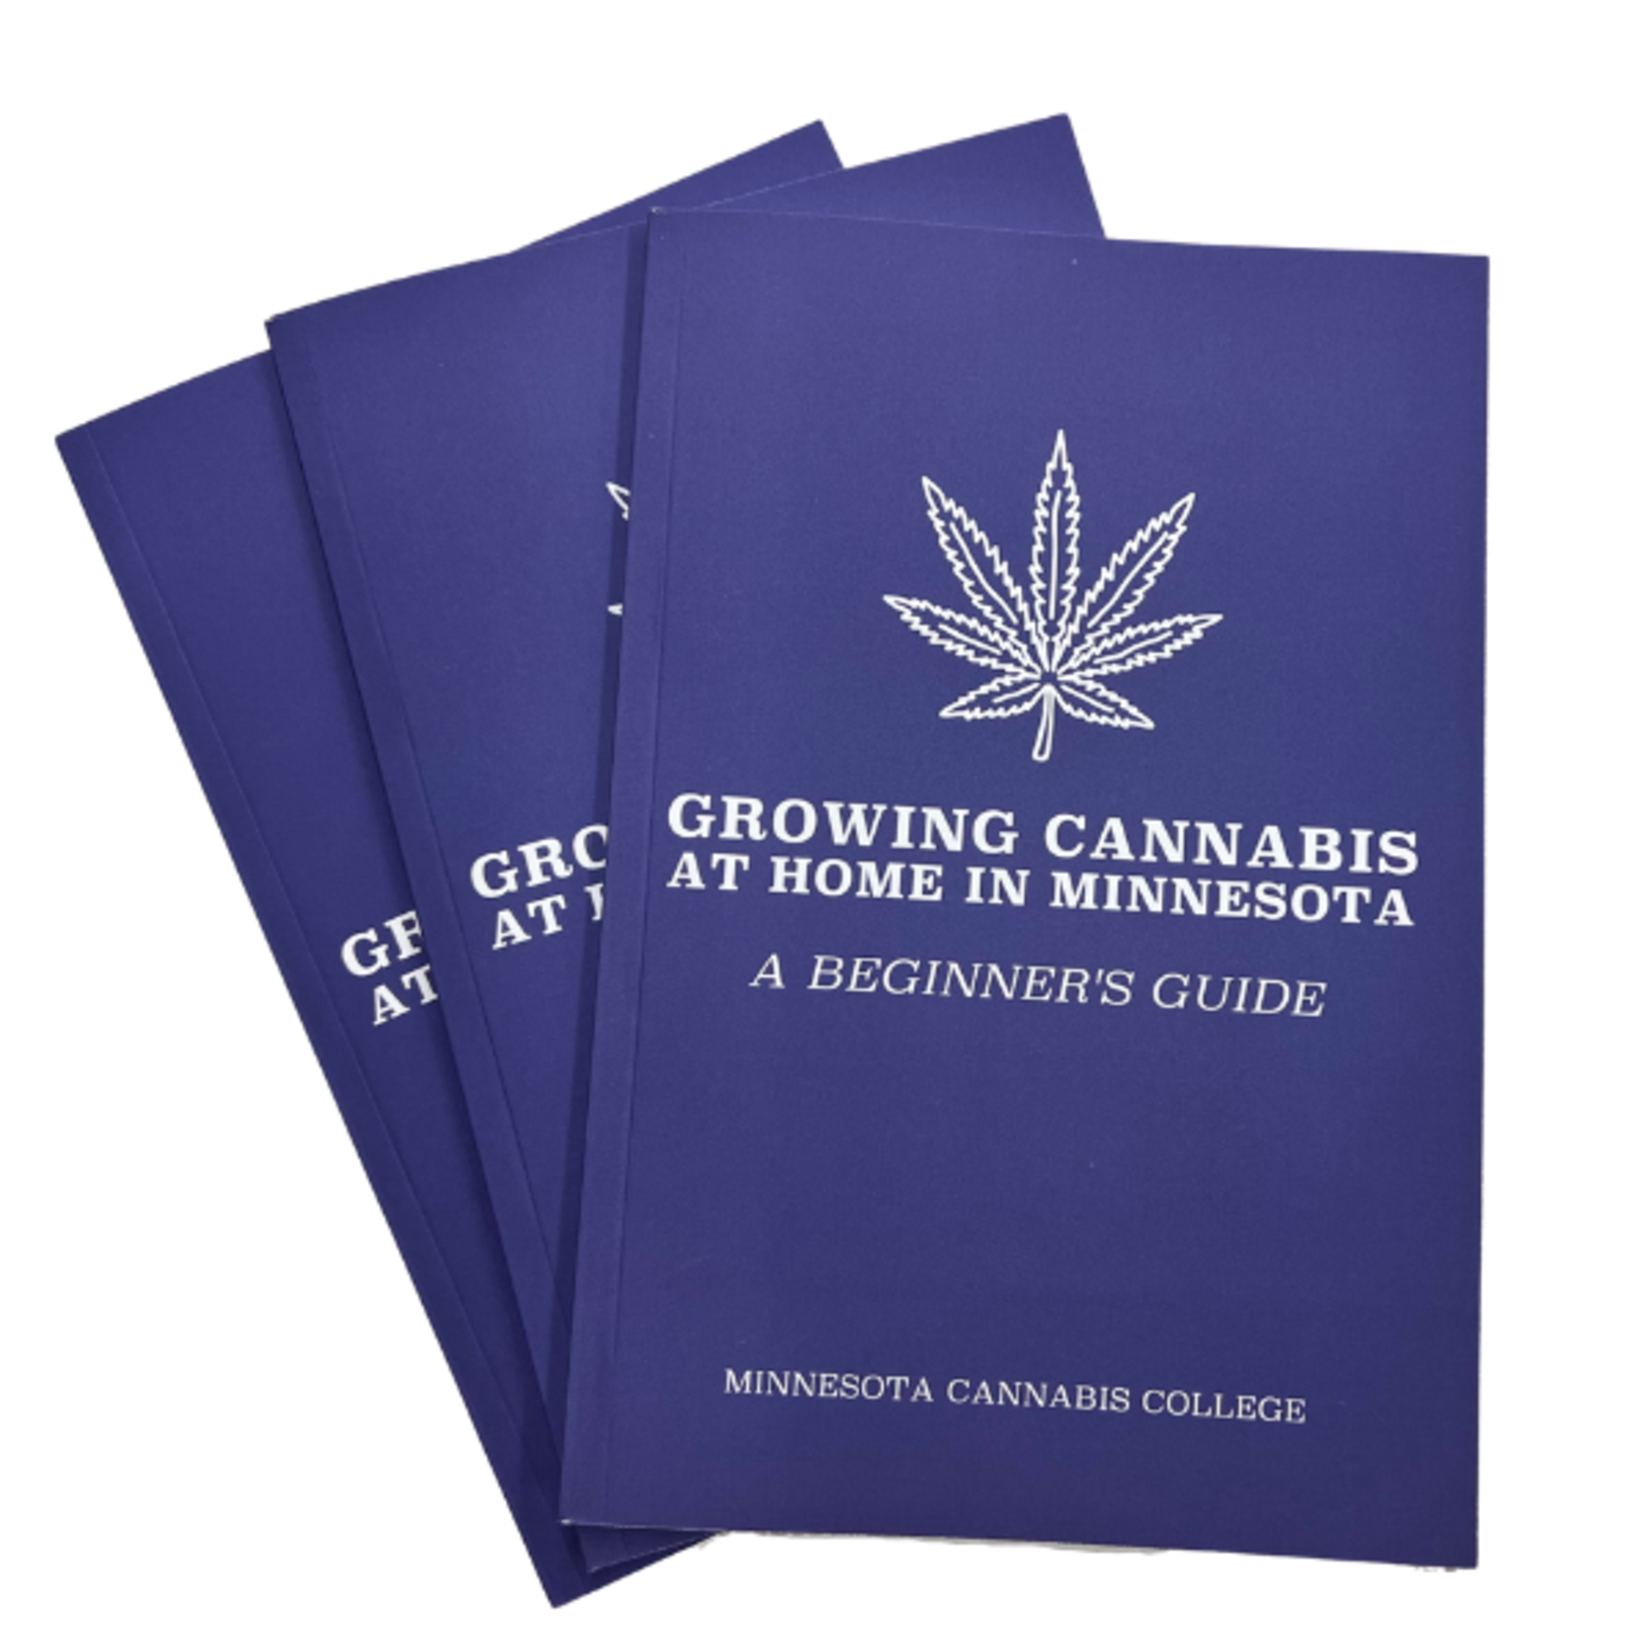 Minnesota Cannabis College Growing Cannabis At Home Guide